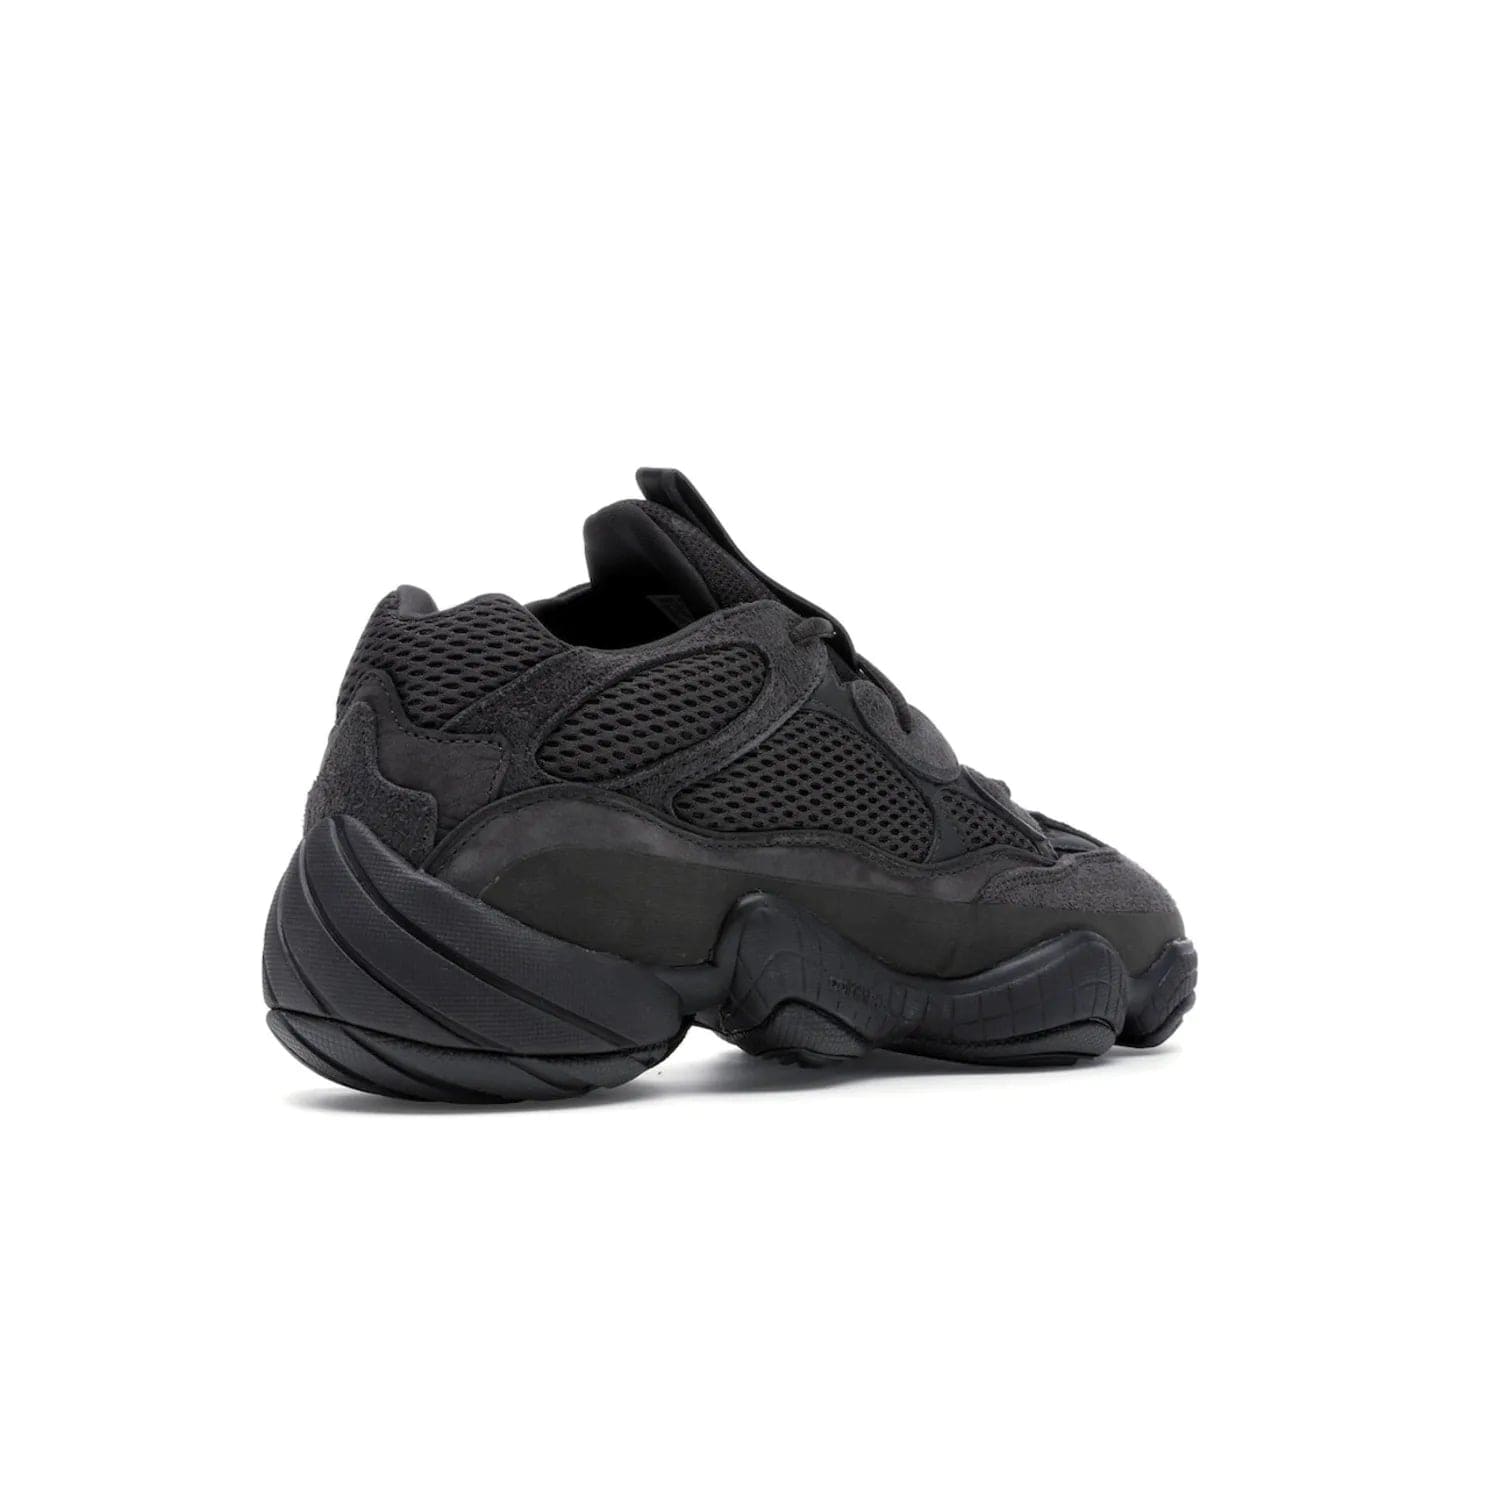 adidas Yeezy 500 Utility Black - Image 33 - Only at www.BallersClubKickz.com - Iconic adidas Yeezy 500 Utility Black in All-Black colorway. Durable black mesh and suede upper with adiPRENE® sole delivers comfort and support. Be unstoppable with the Yeezy 500 Utility Black. Released July 2018.